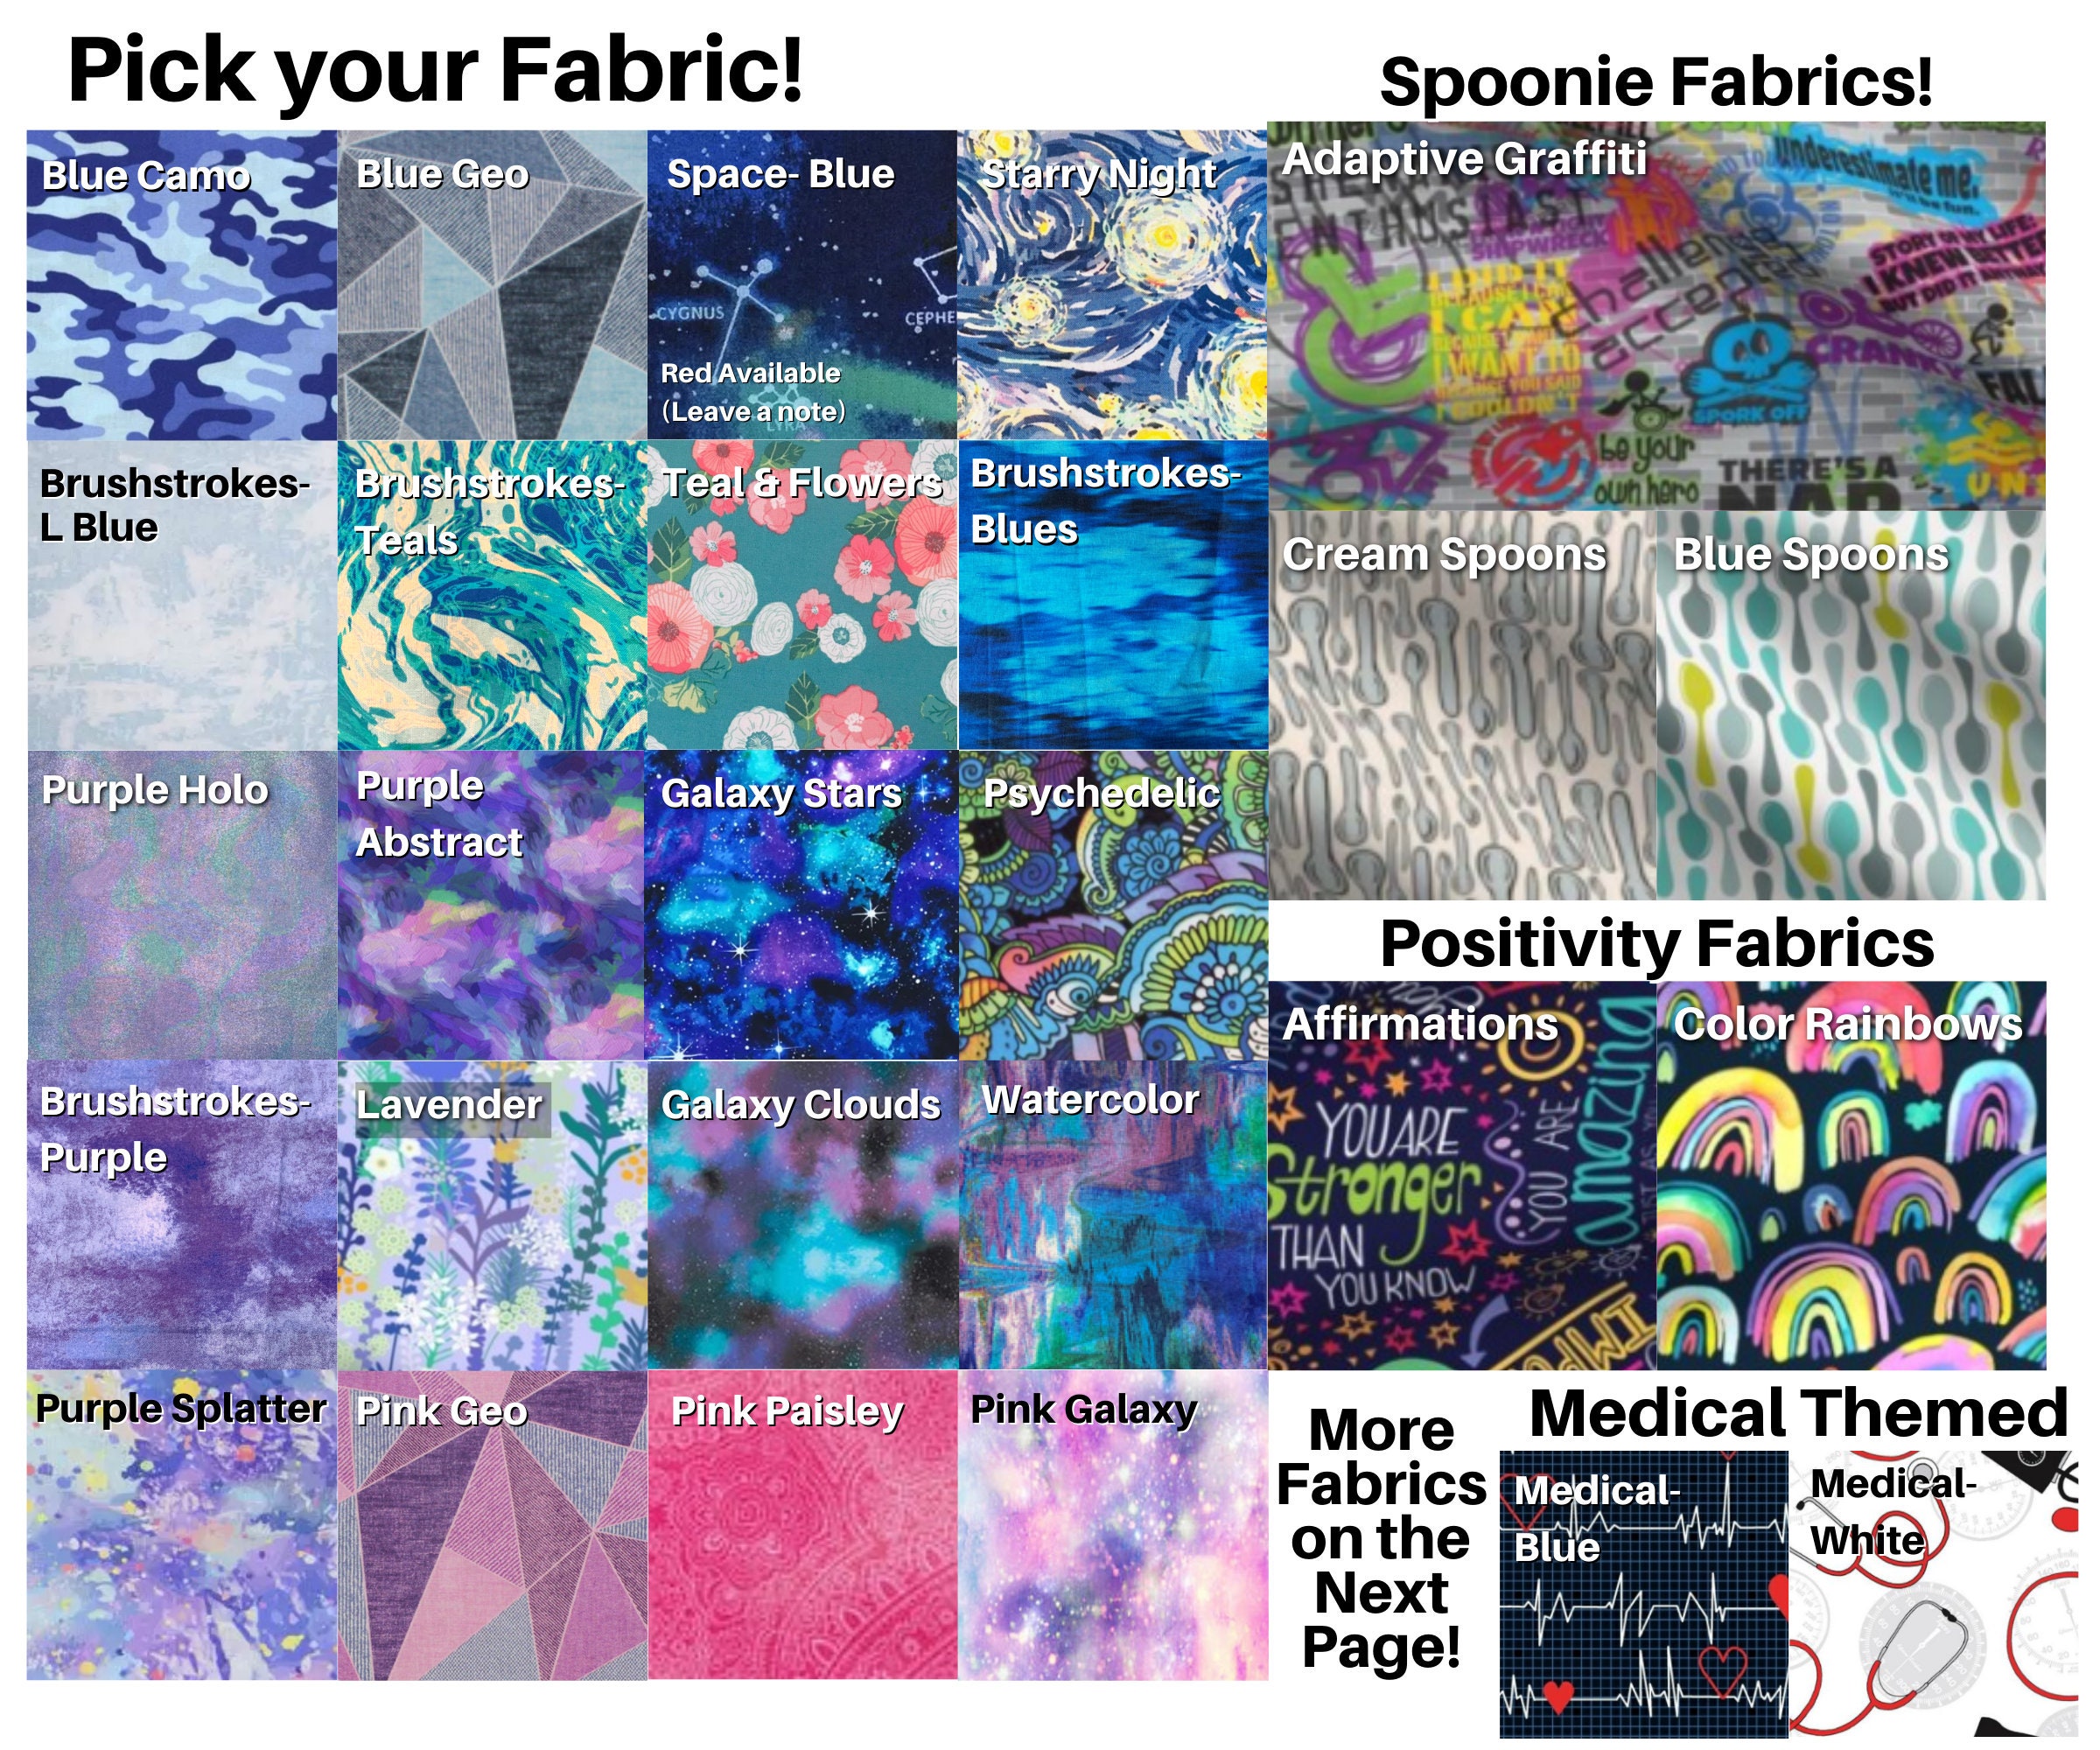 28 fabrics are shown in mostly blues and purples, some pink. There are also fabrics marked as Spoonie fabrics, positivity fabrics, and medical themed.